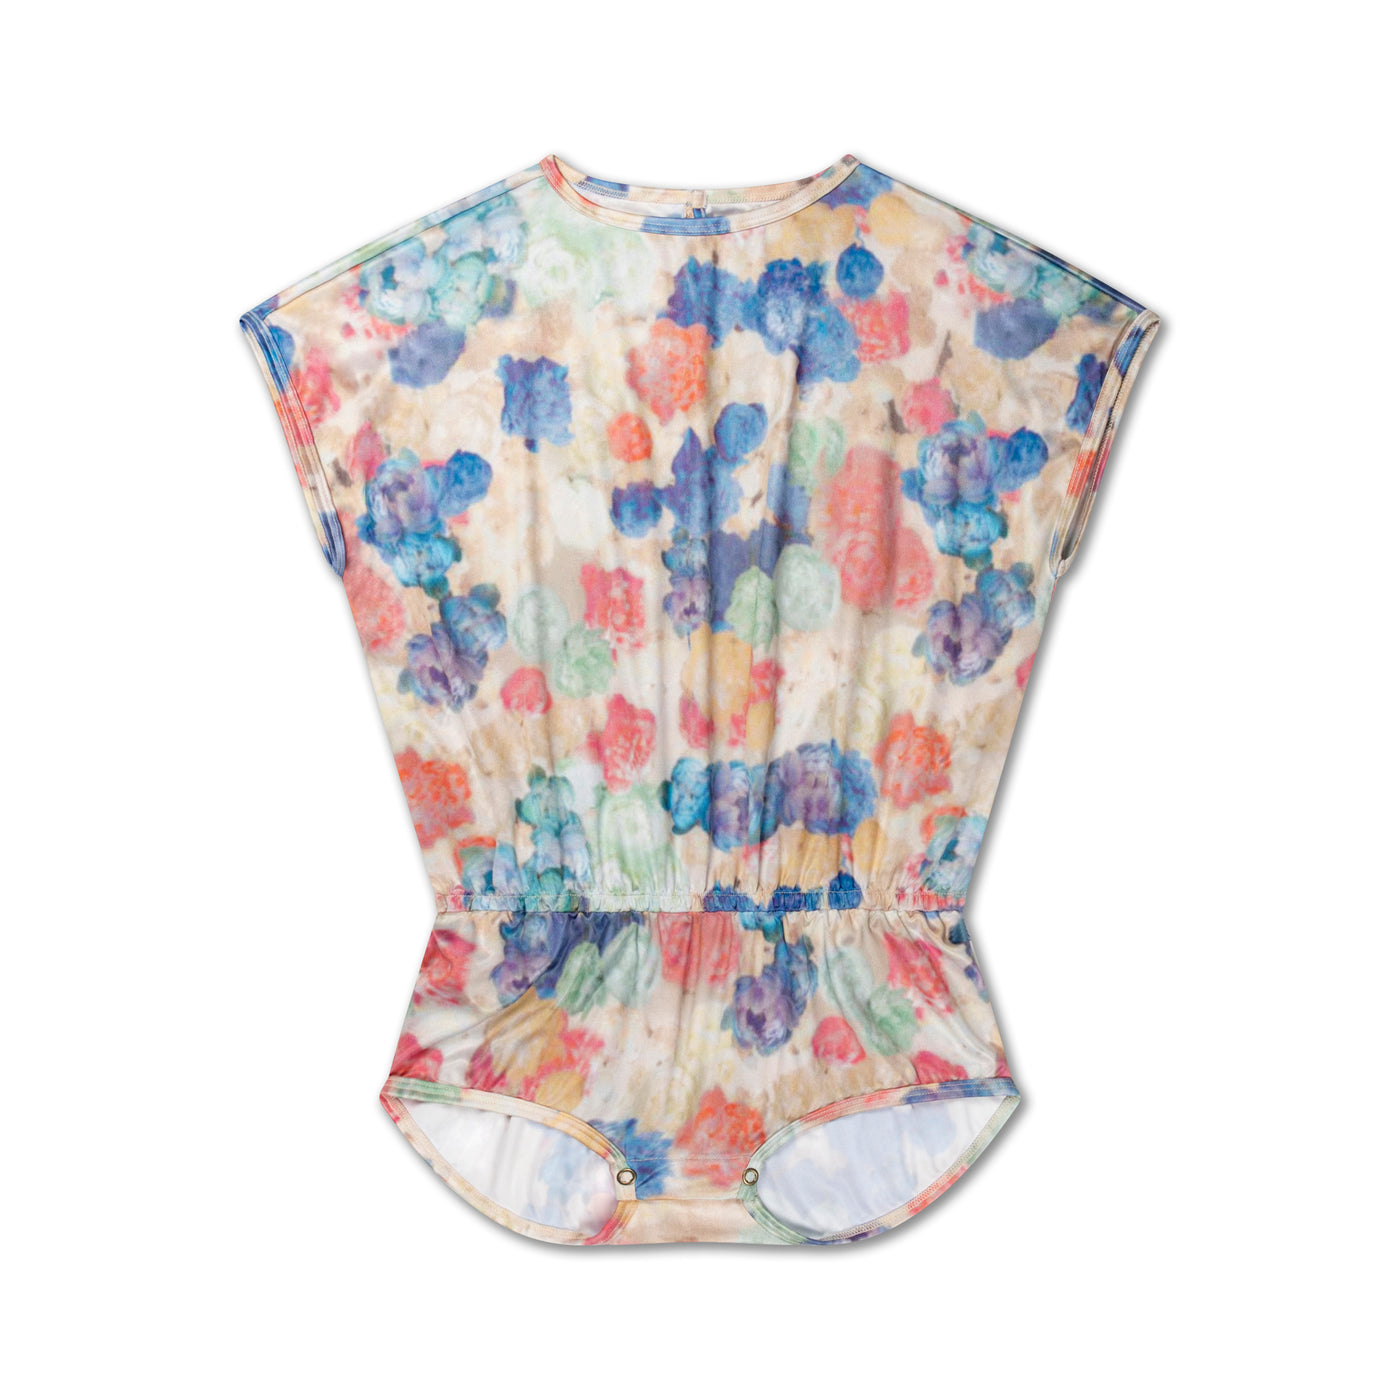 playsuit - faded flower